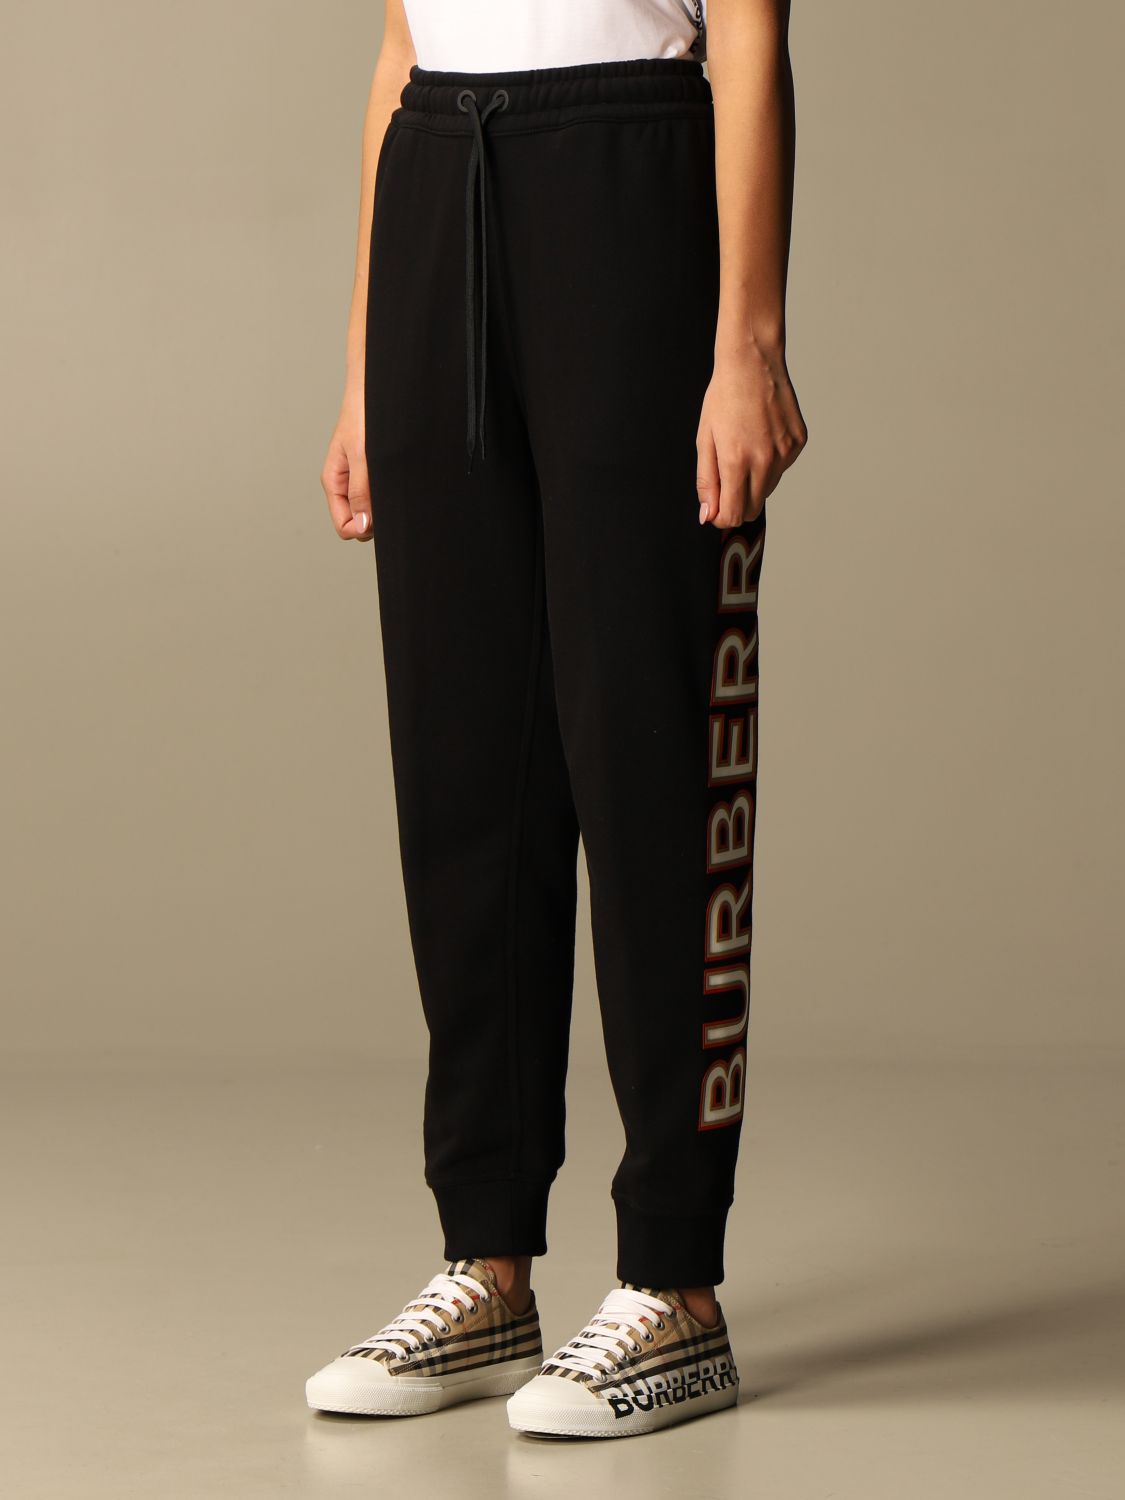 BURBERRY: Esmee cotton jogging trousers with logo - Black | pants 8037260 online at GIGLIO.COM